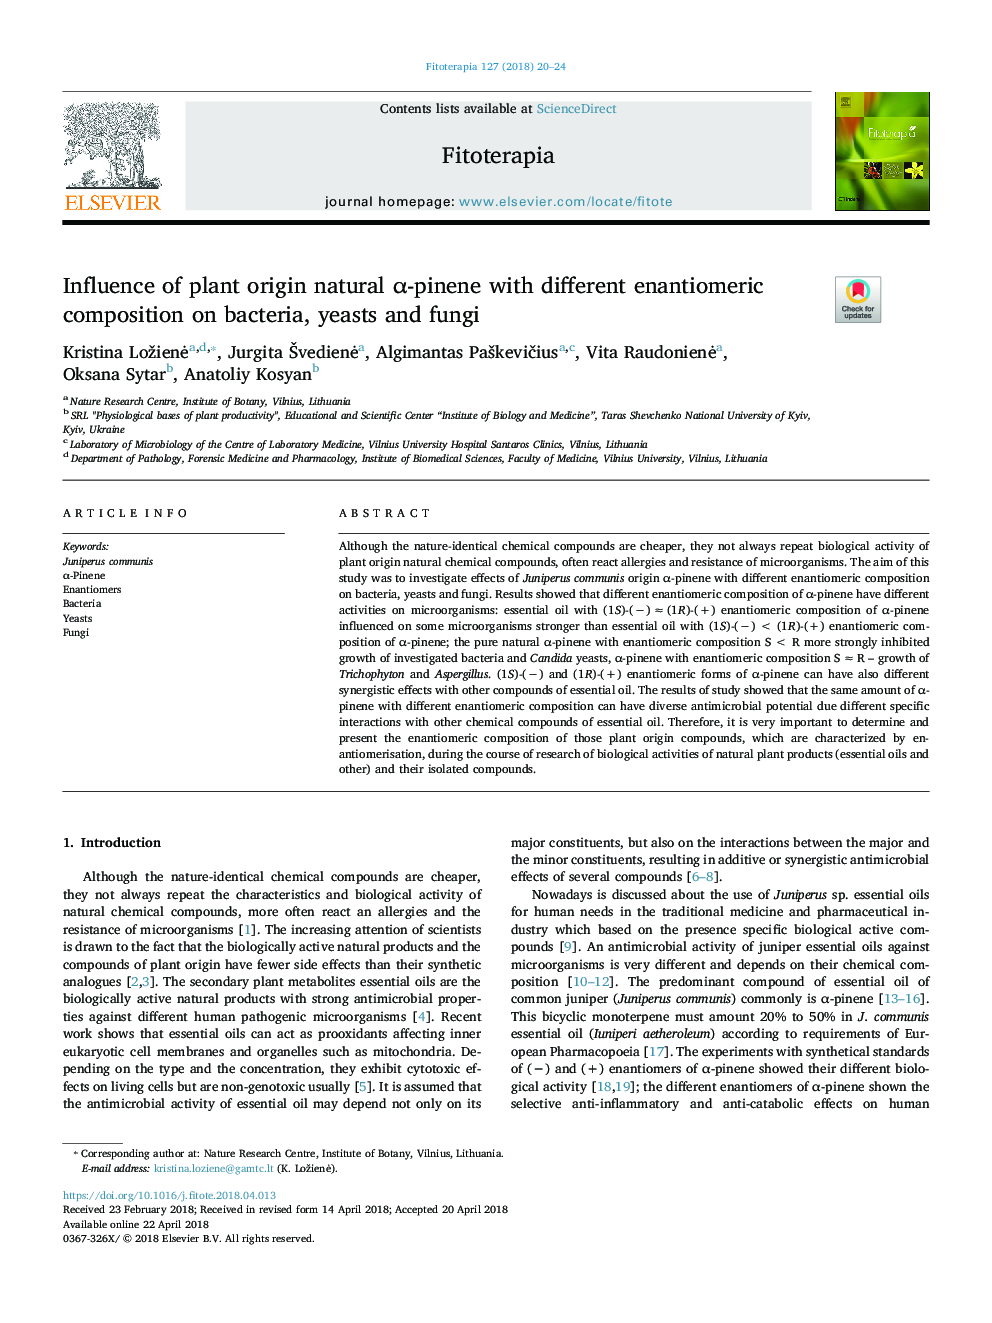 Influence of plant origin natural Î±-pinene with different enantiomeric composition on bacteria, yeasts and fungi